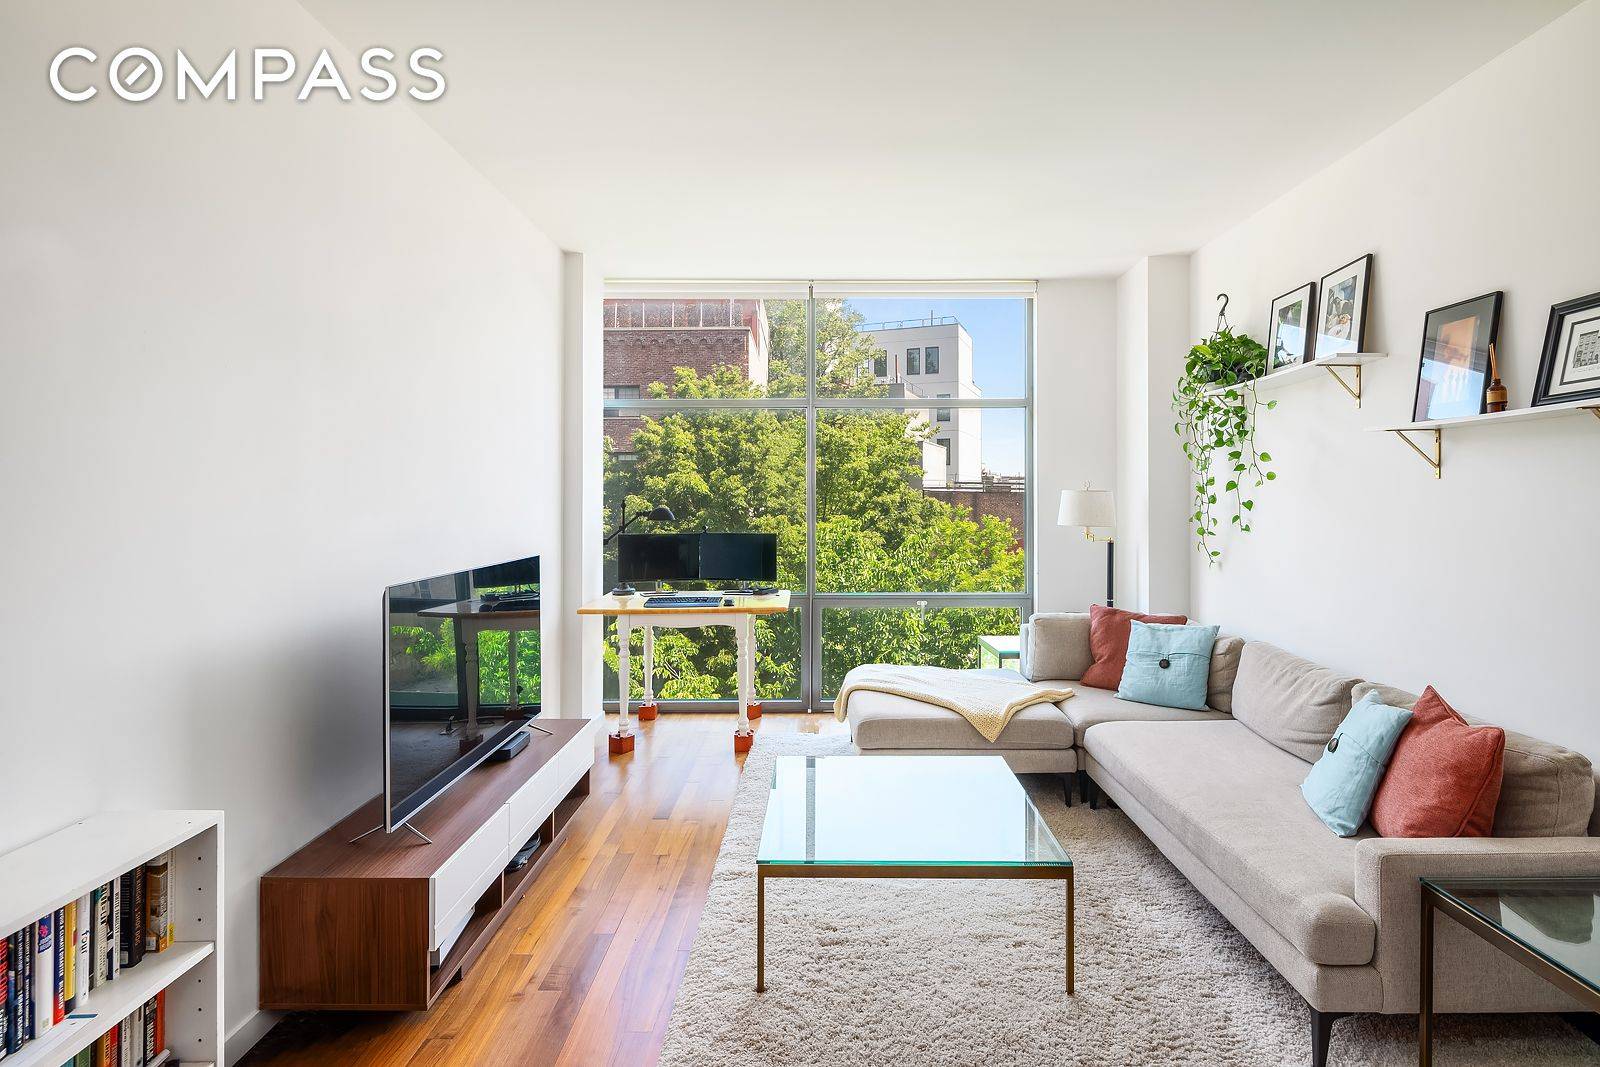 Residence 3E is a spacious one bedroom home located at 280 Metropolitan, a modern boutique new construction condominium overlooking a serene, tree lined block in the heart of Williamsburg.